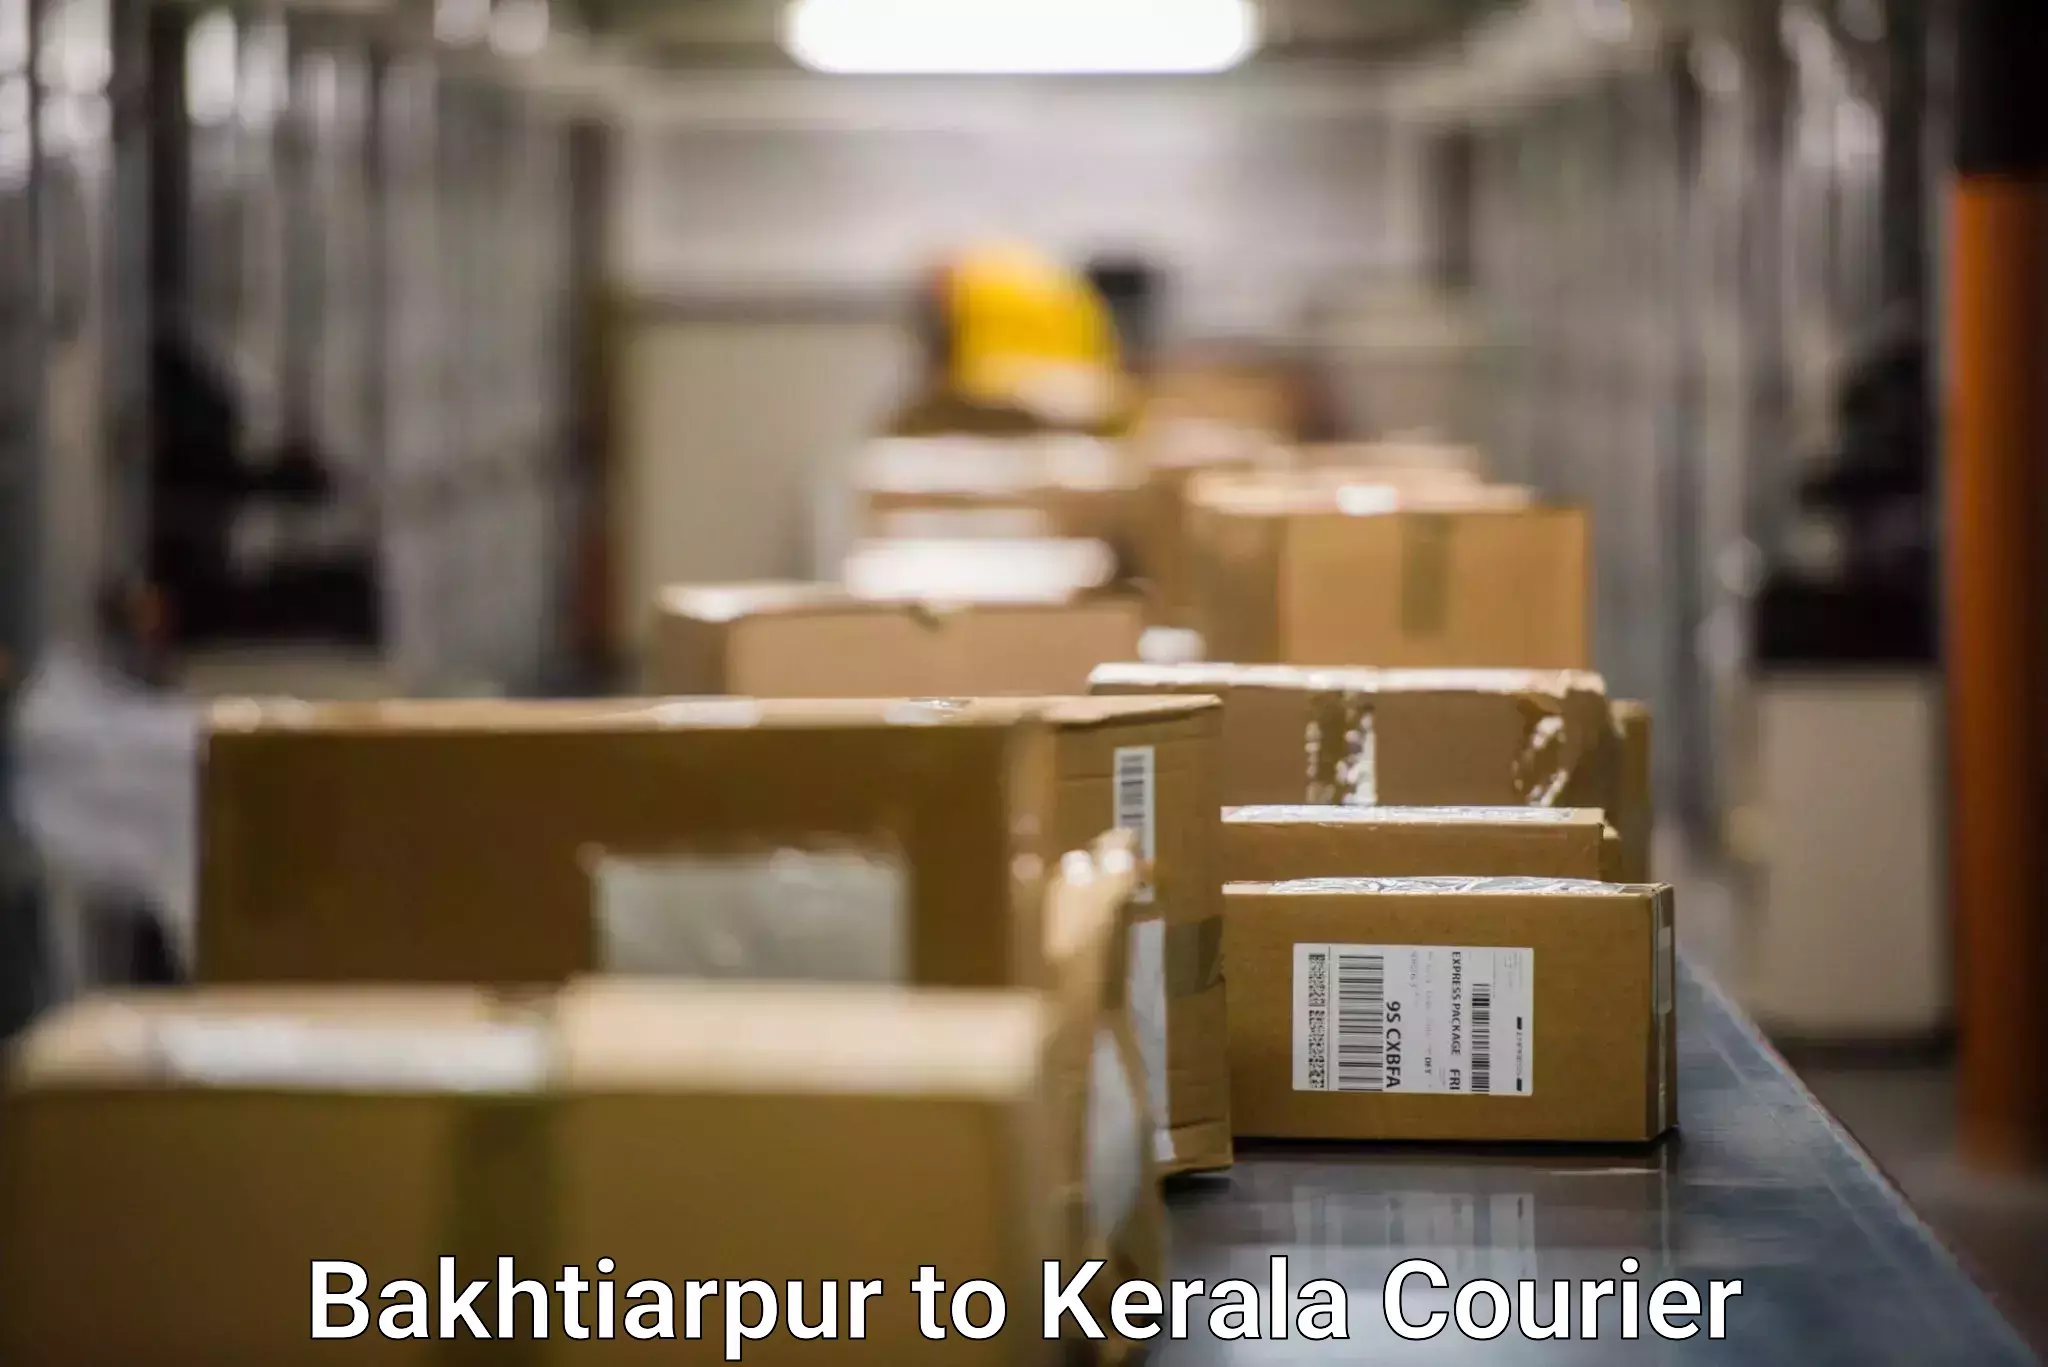 Reliable delivery network in Bakhtiarpur to Trivandrum